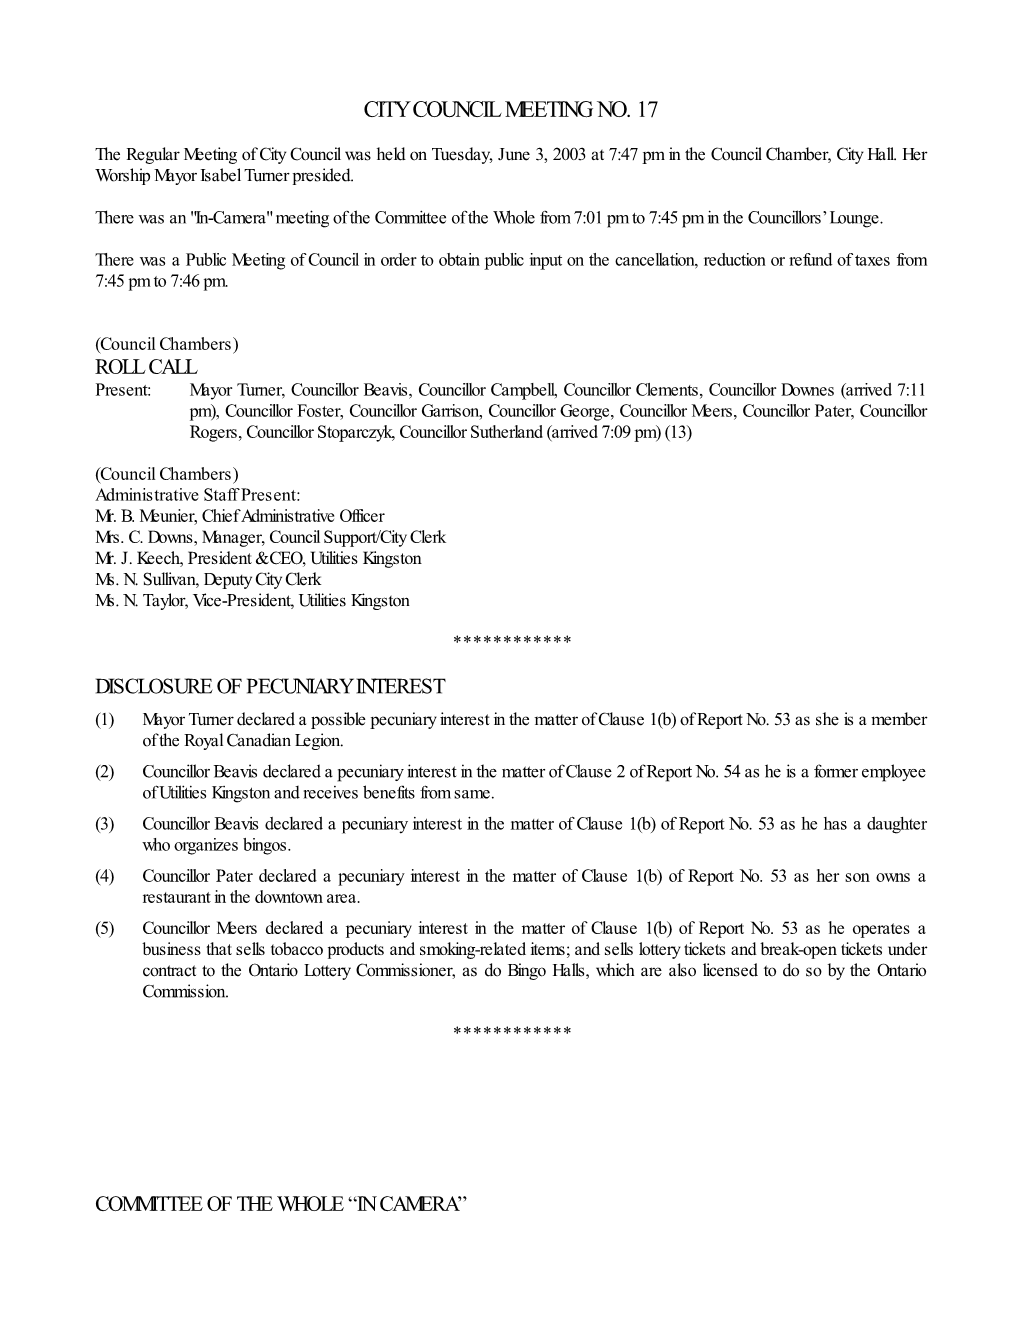 Council Meeting Minutes